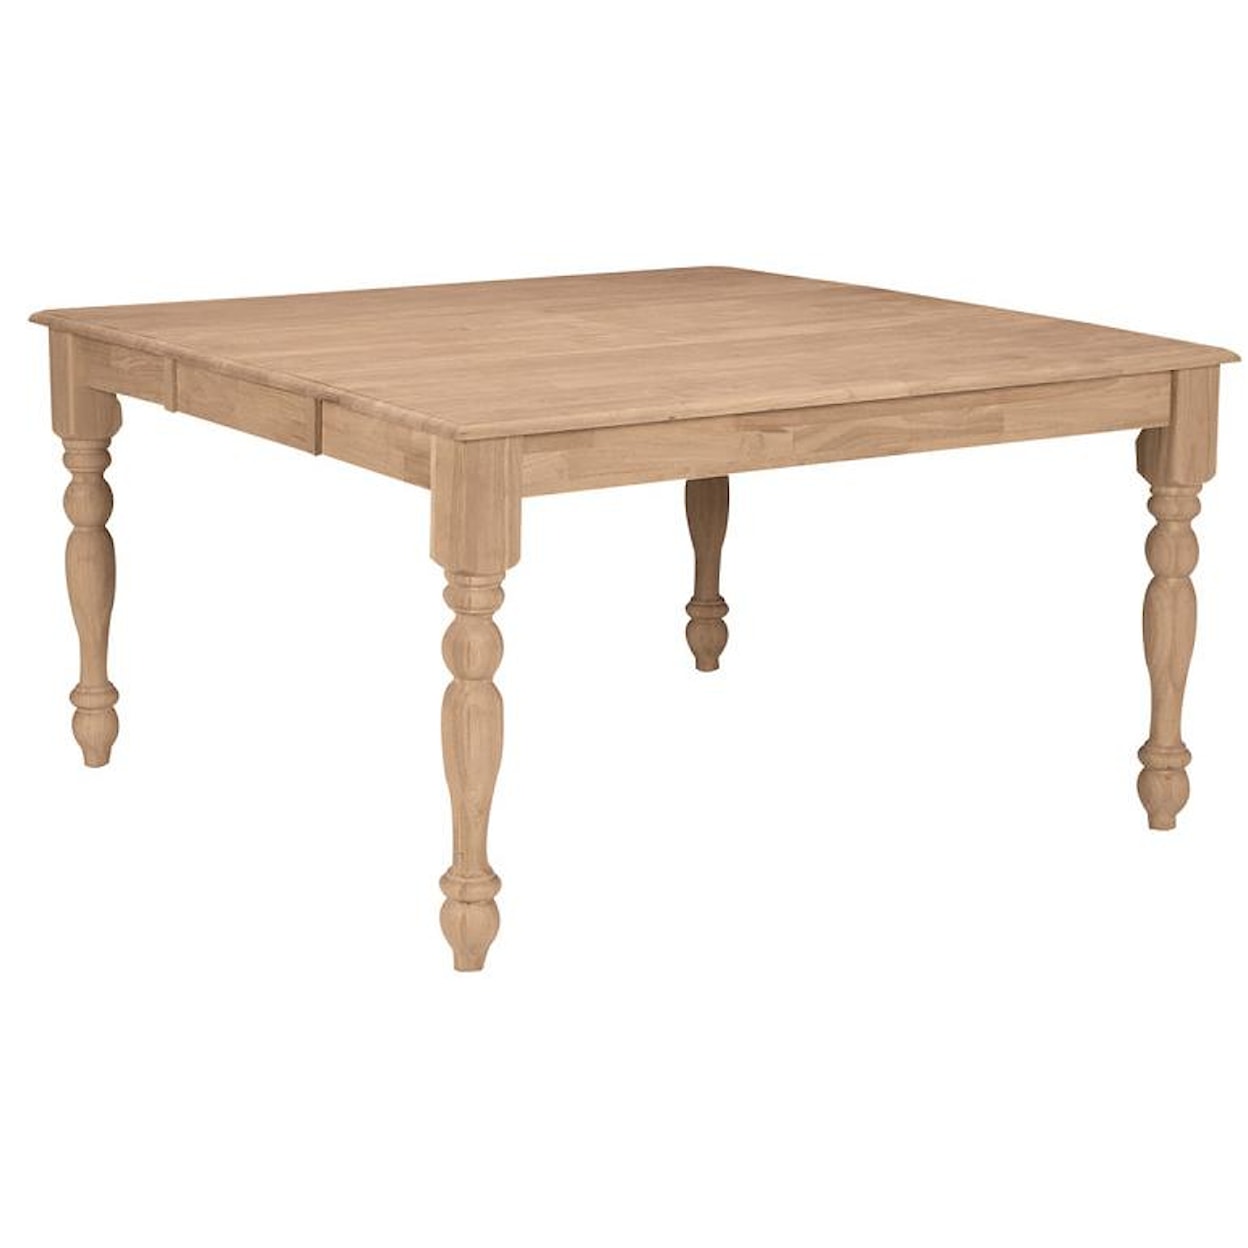 John Thomas SELECT Dining Square Butterfly Leaf Table with Turned Legs